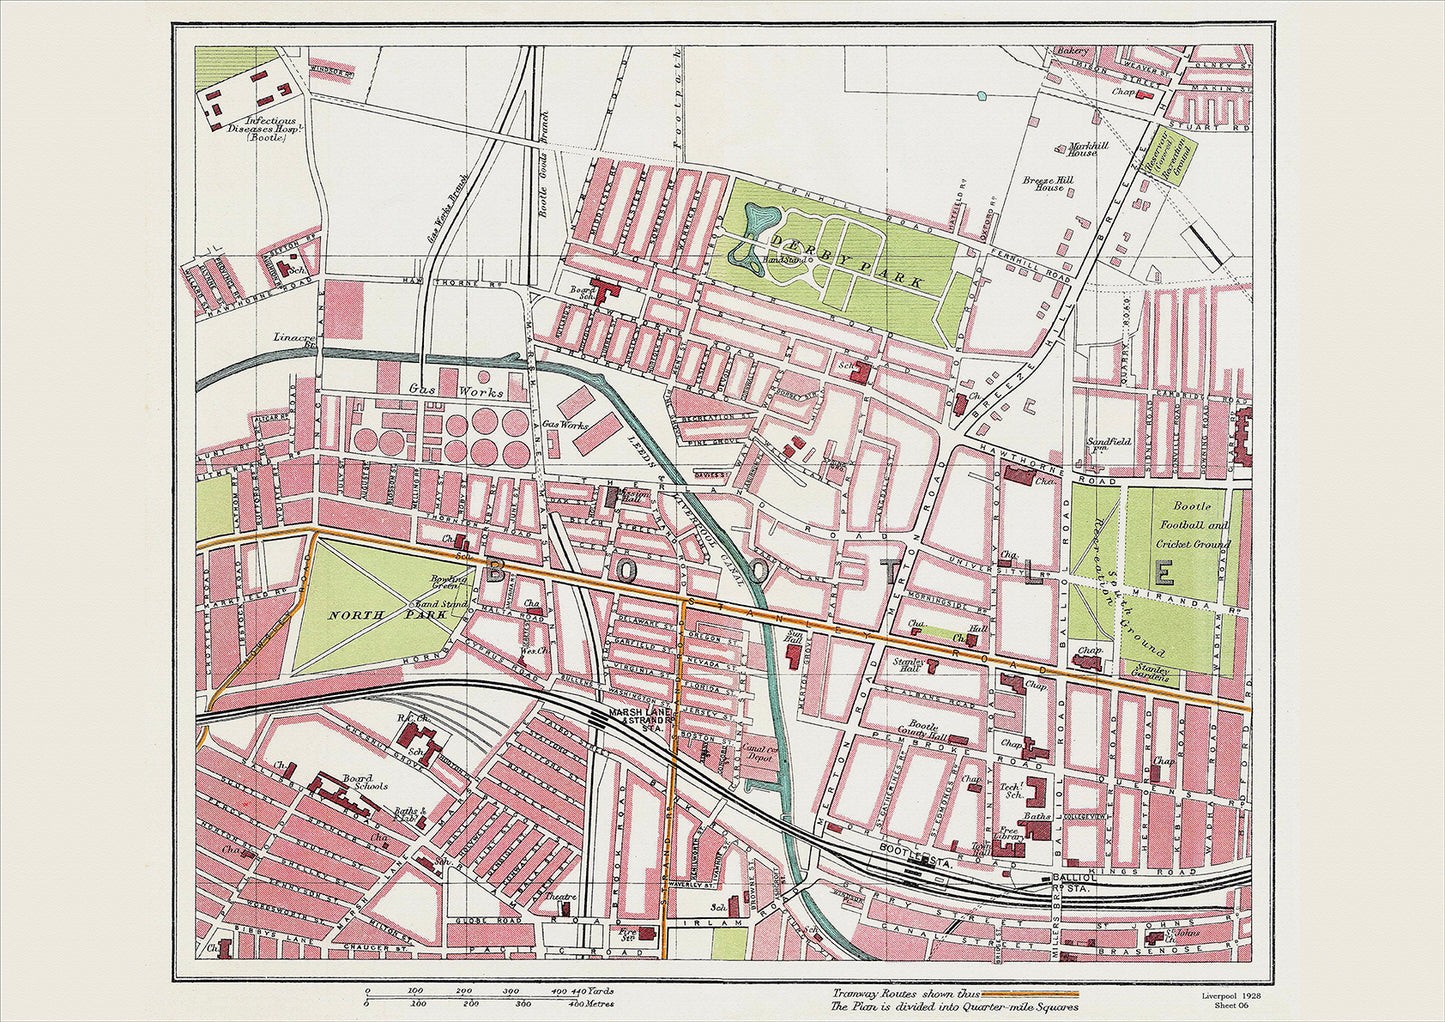 Liverpool in 1928 Series - showing Bootle area (Liv1928-06)